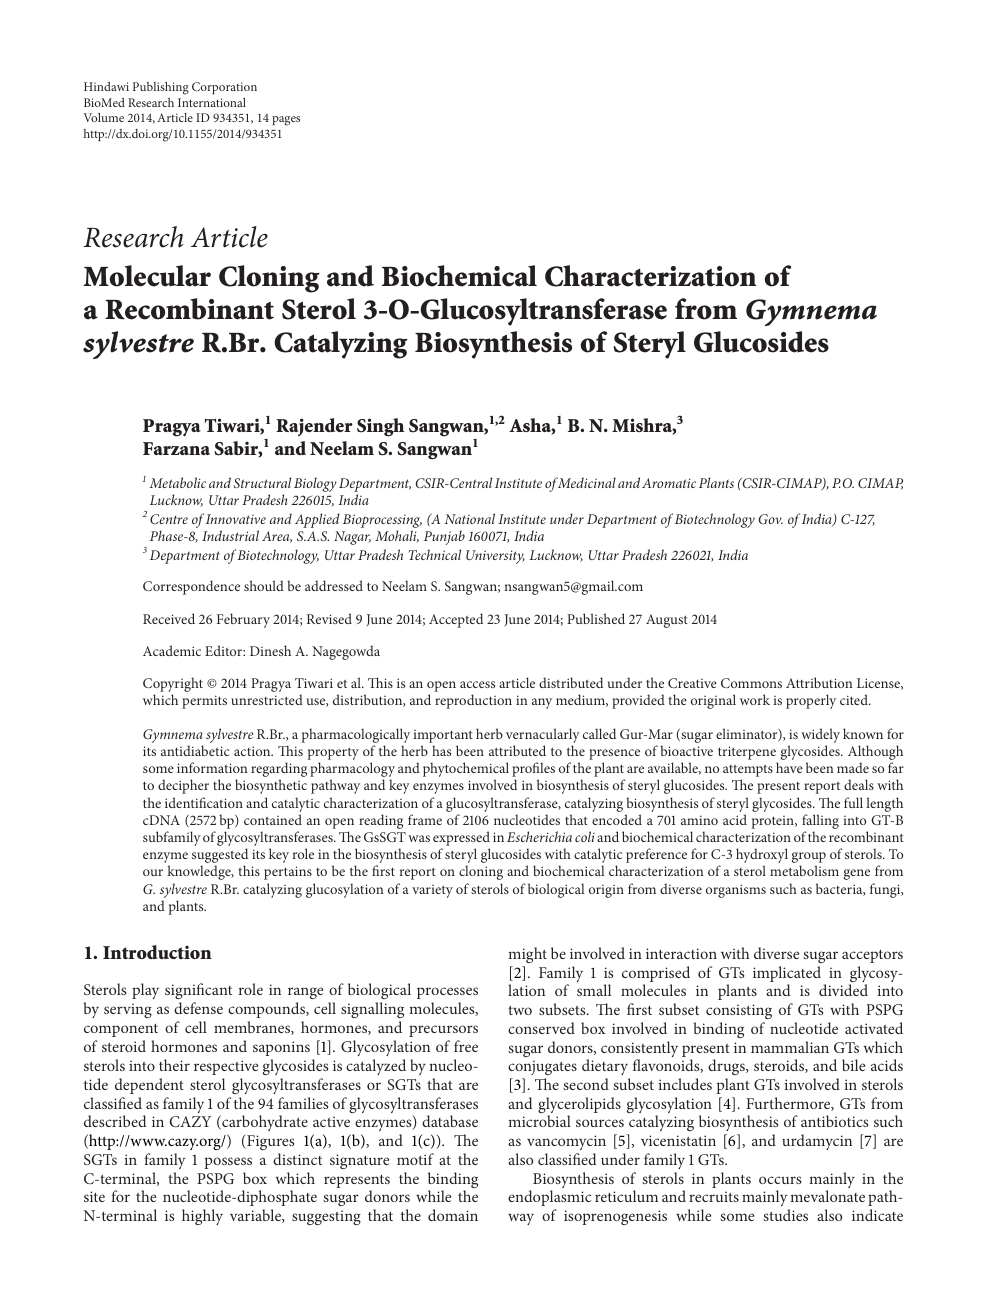 Molecular Cloning And Biochemical Characterization Of A Recombinant Sterol 3 O Glucosyltransferase From Gymnema Sylvestre R Br Catalyzing Biosynthesis Of Steryl Glucosides Topic Of Research Paper In Biological Sciences Download Scholarly Article